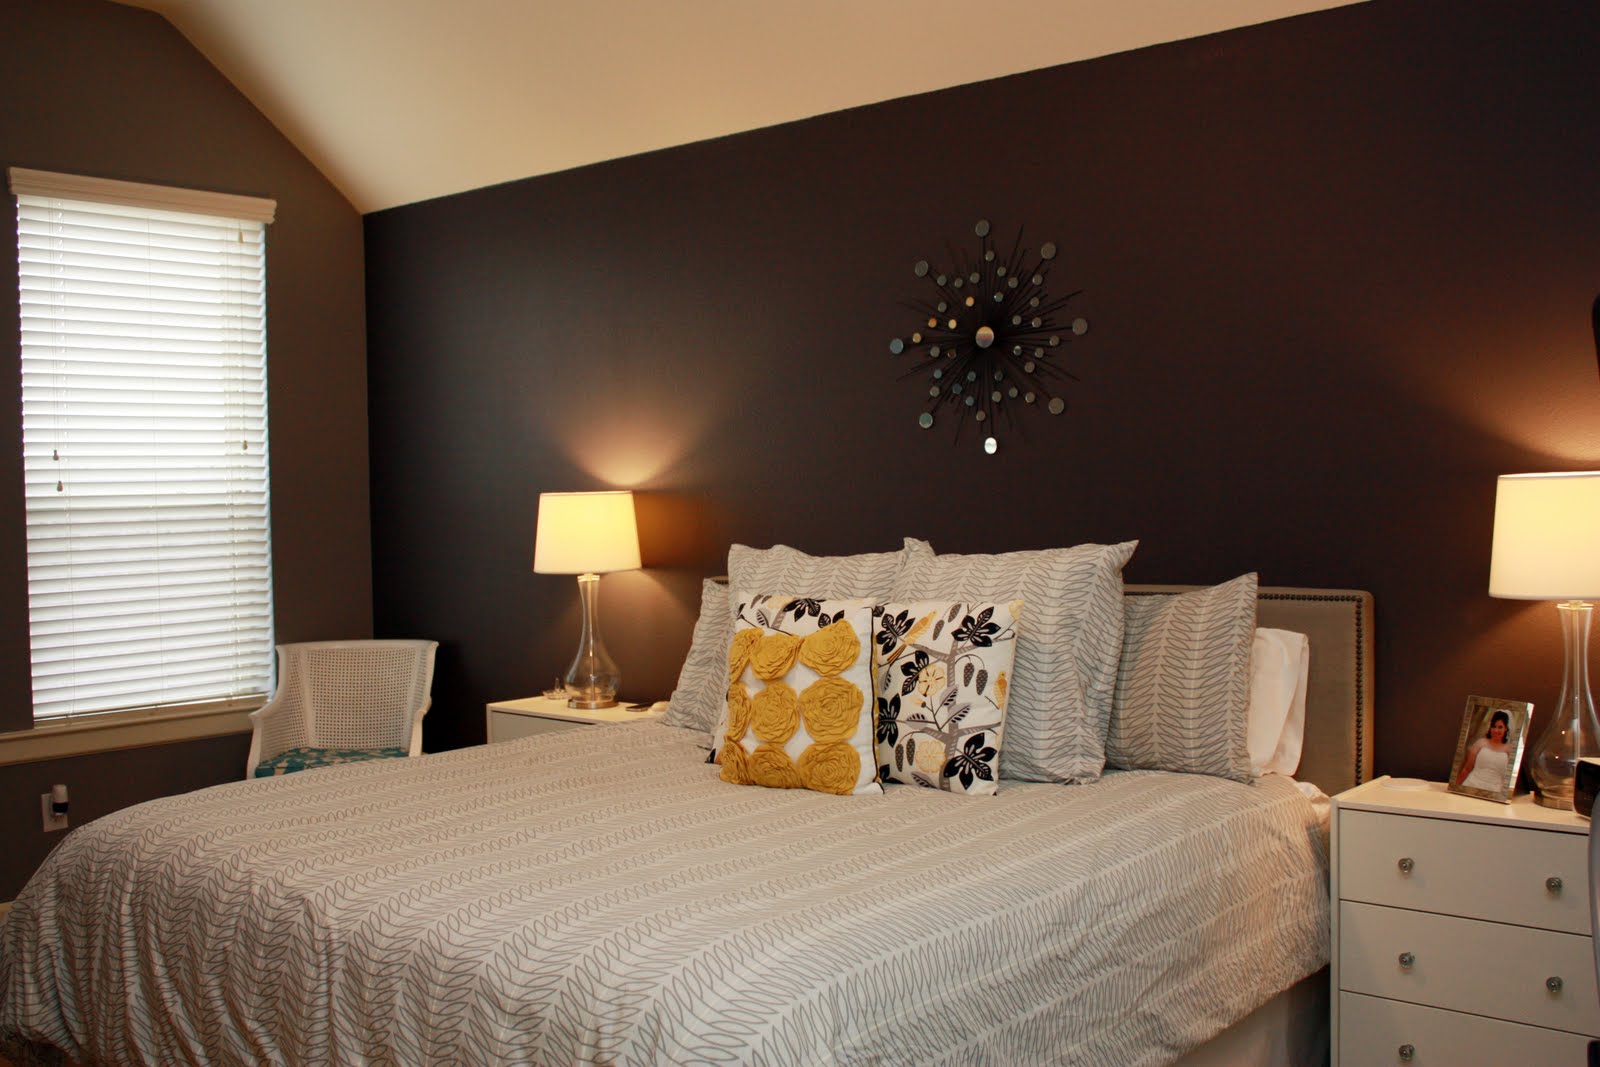 pic new posts: Wallpaper Accent Wall Master Bedroom